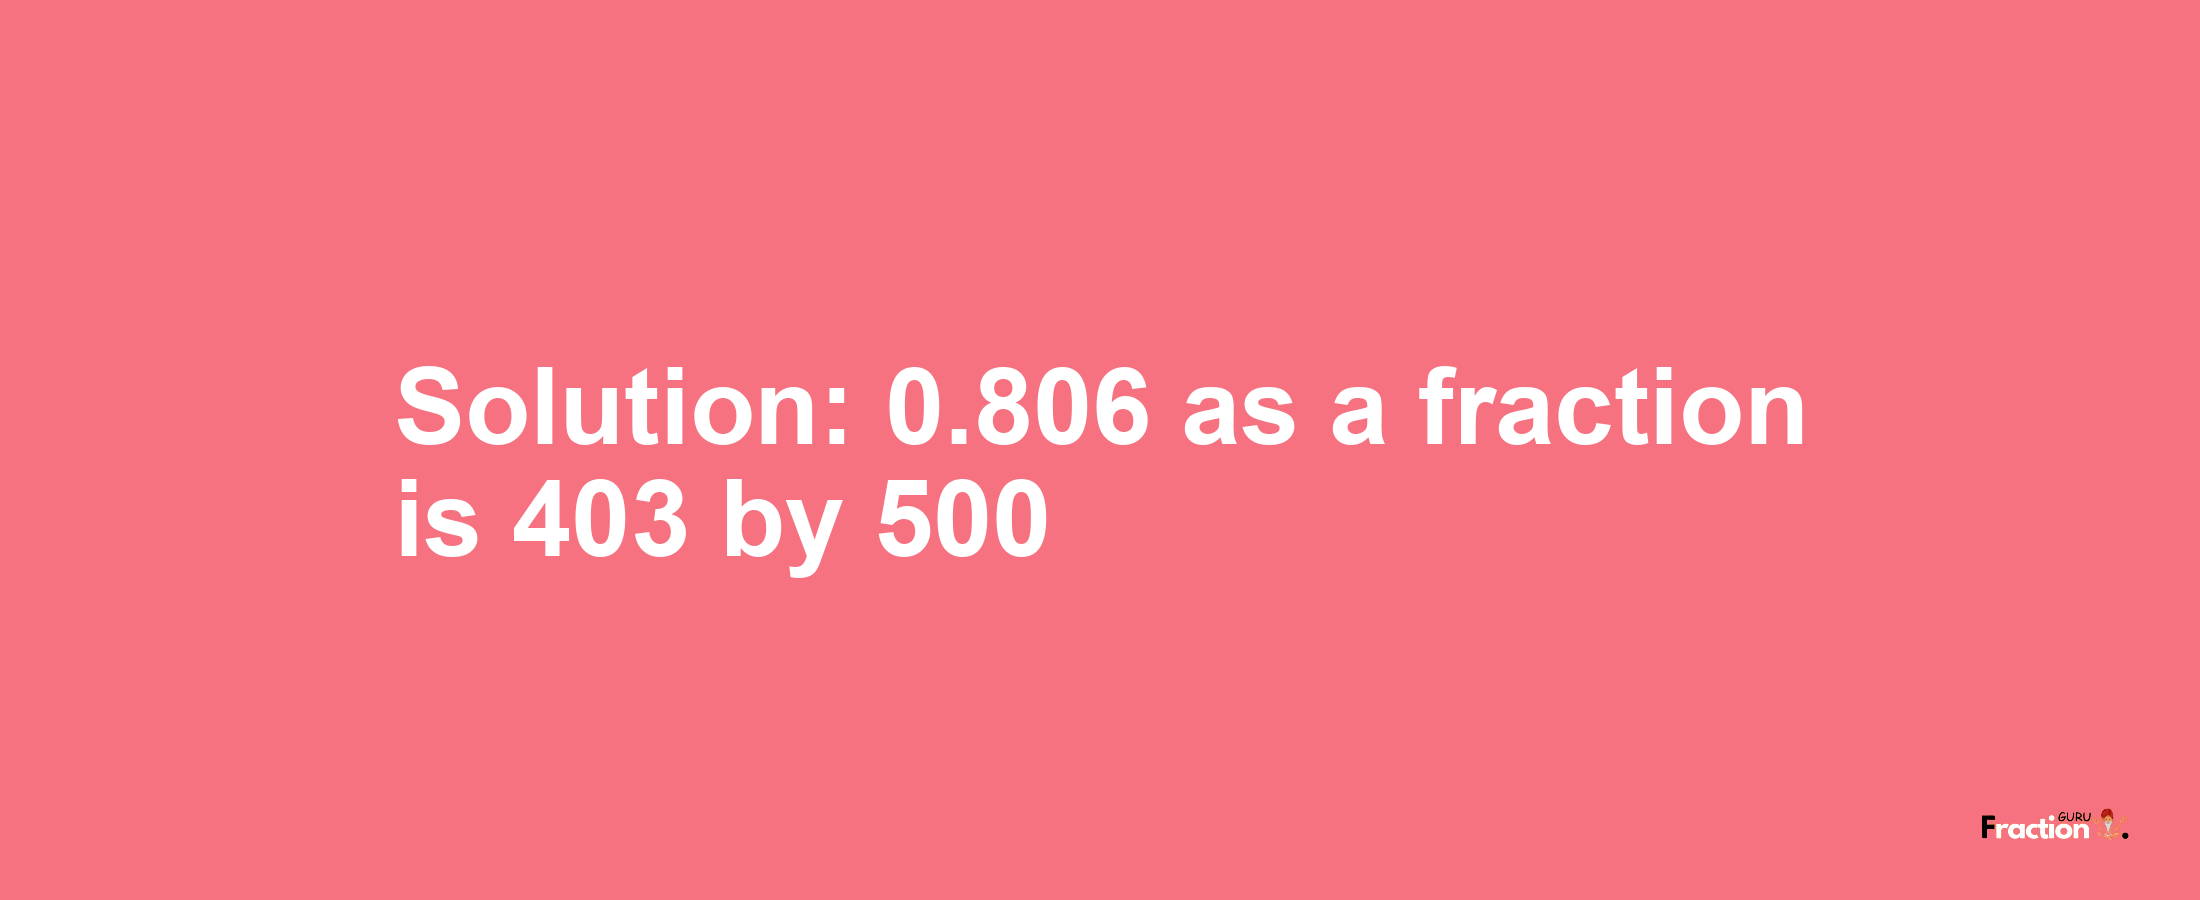 Solution:0.806 as a fraction is 403/500